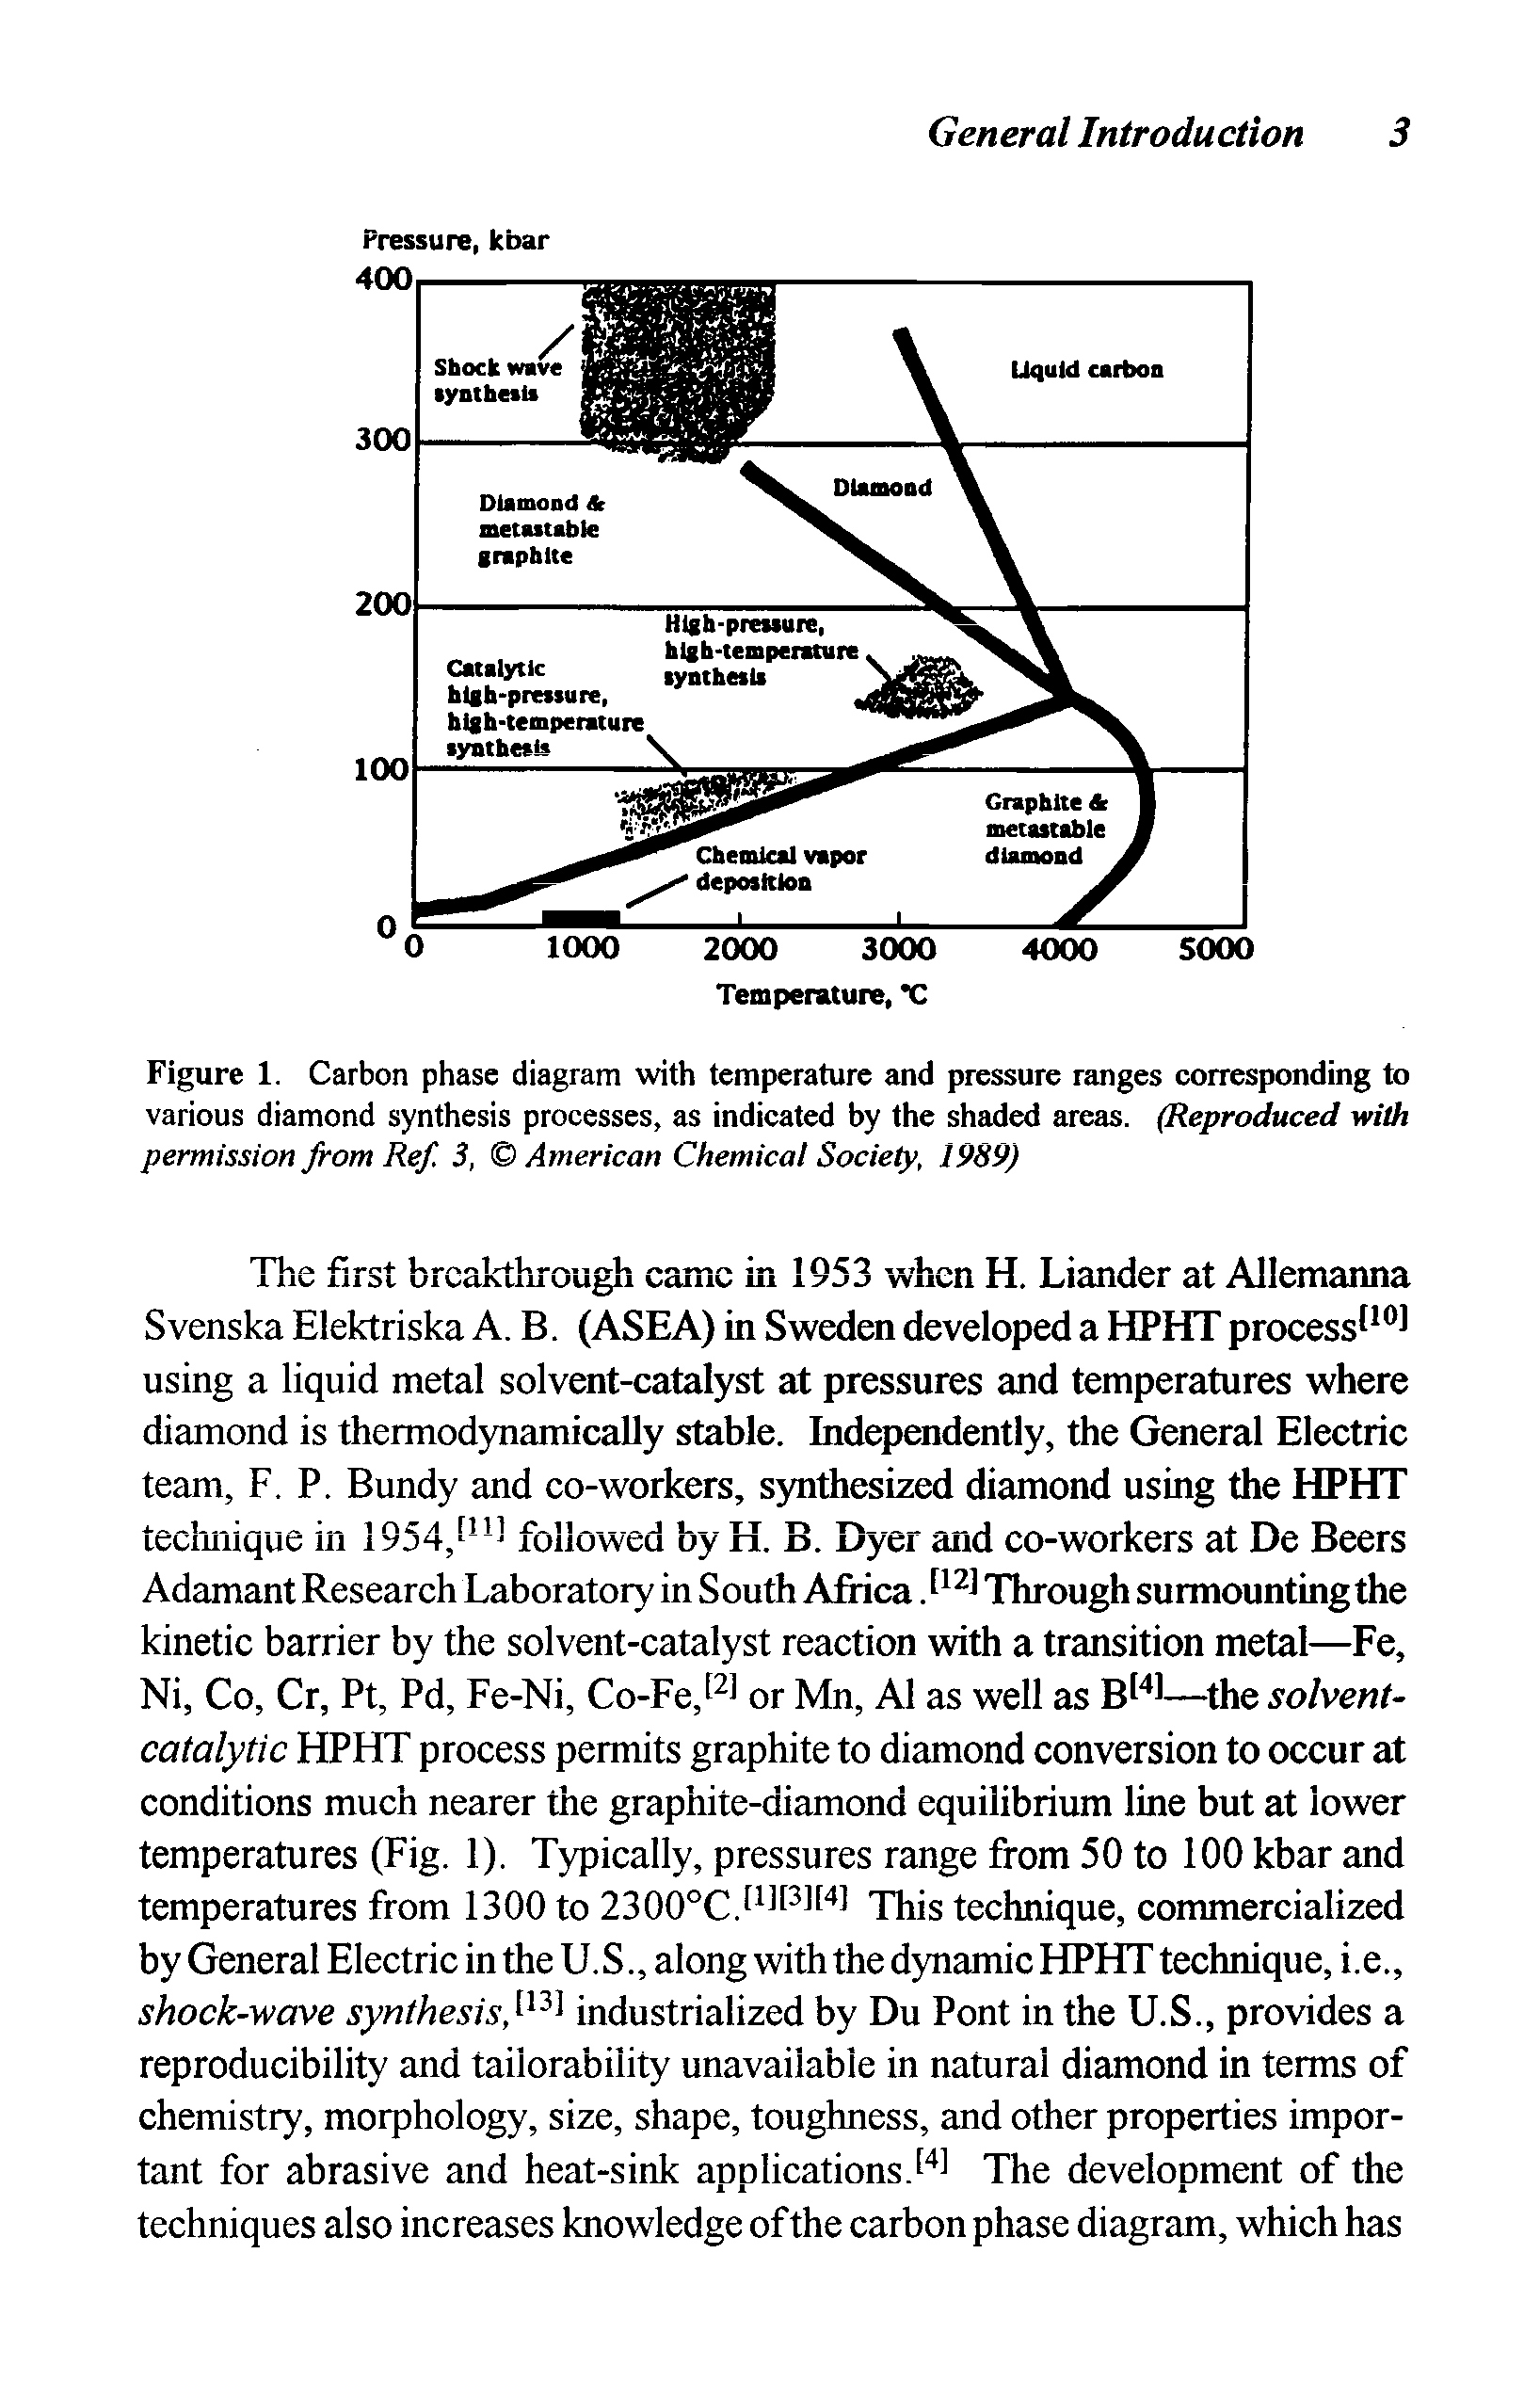 Figure 1. Carbon phase diagram with temperature and pressure ranges corresponding to various diamond synthesis processes, as indicated by the shaded areas. (Reproduced with permission from Ref 3, American Chemical Society, 1989)...